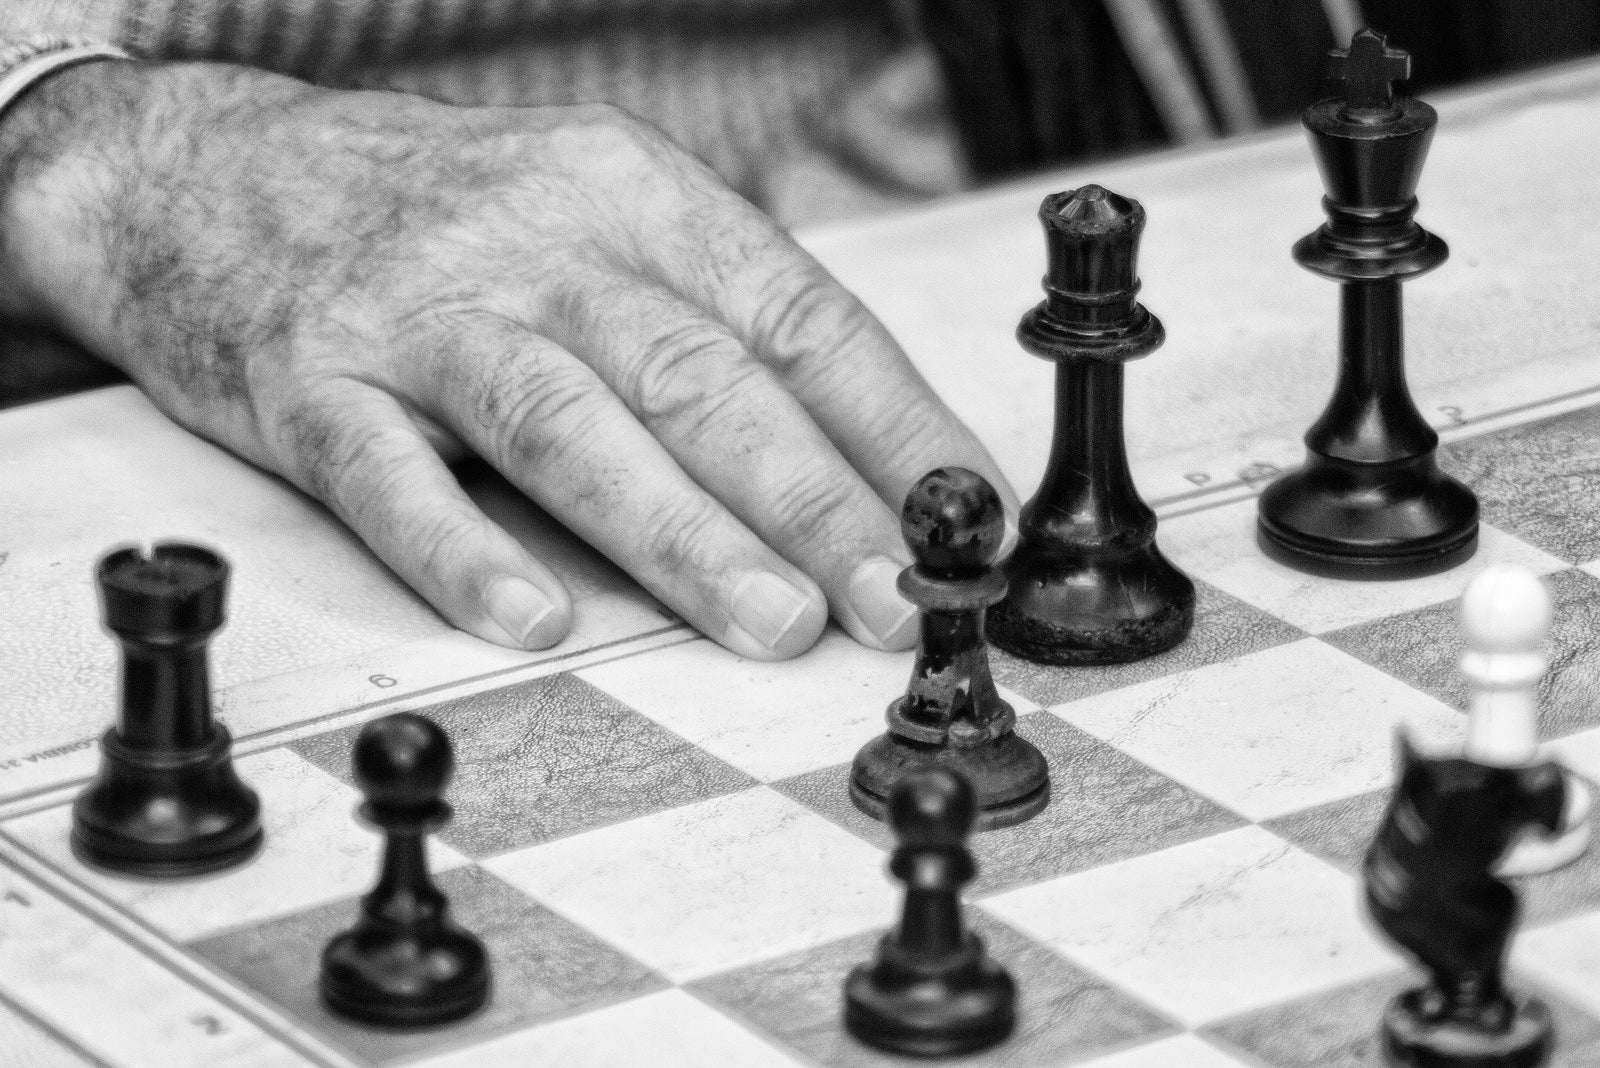 chess grandmasters – News, Research and Analysis – The